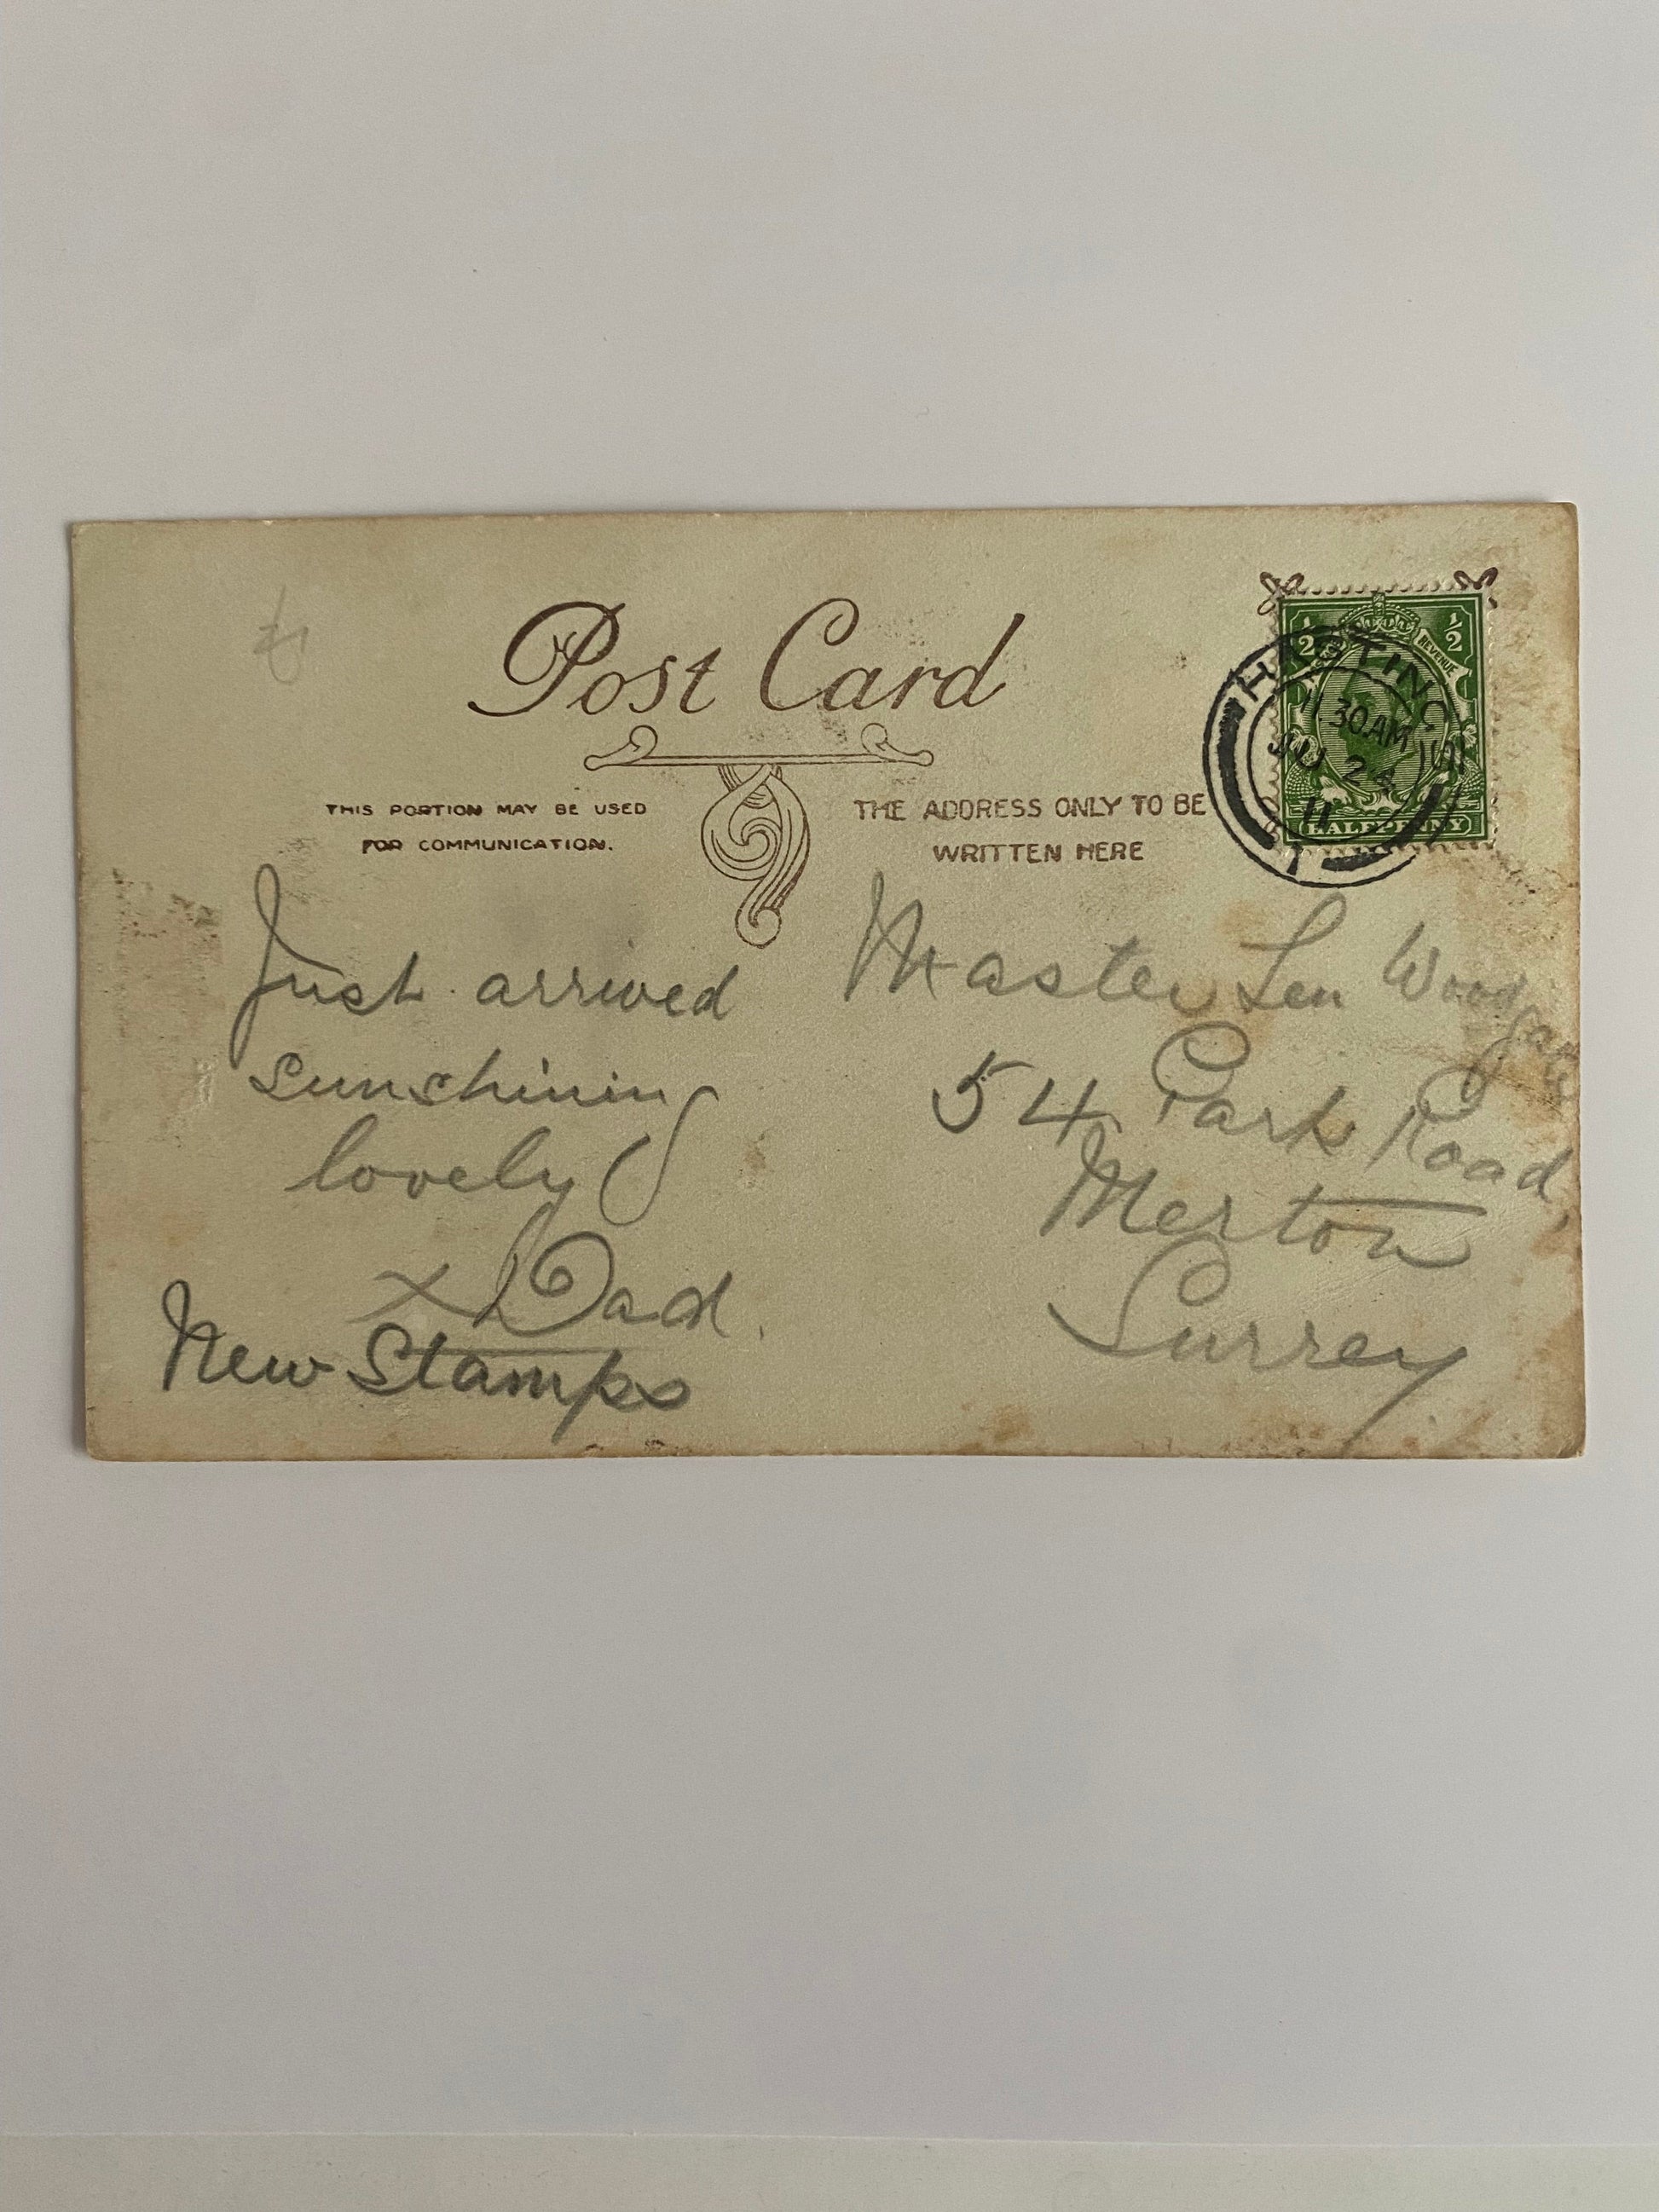 Back of a postcard with writing that says "Just arrived, sunshine lovely x Dad New Stamp". The stamp is a King George Halfpenny stamp in green with a Hastings postmark, dated 2 July 1911